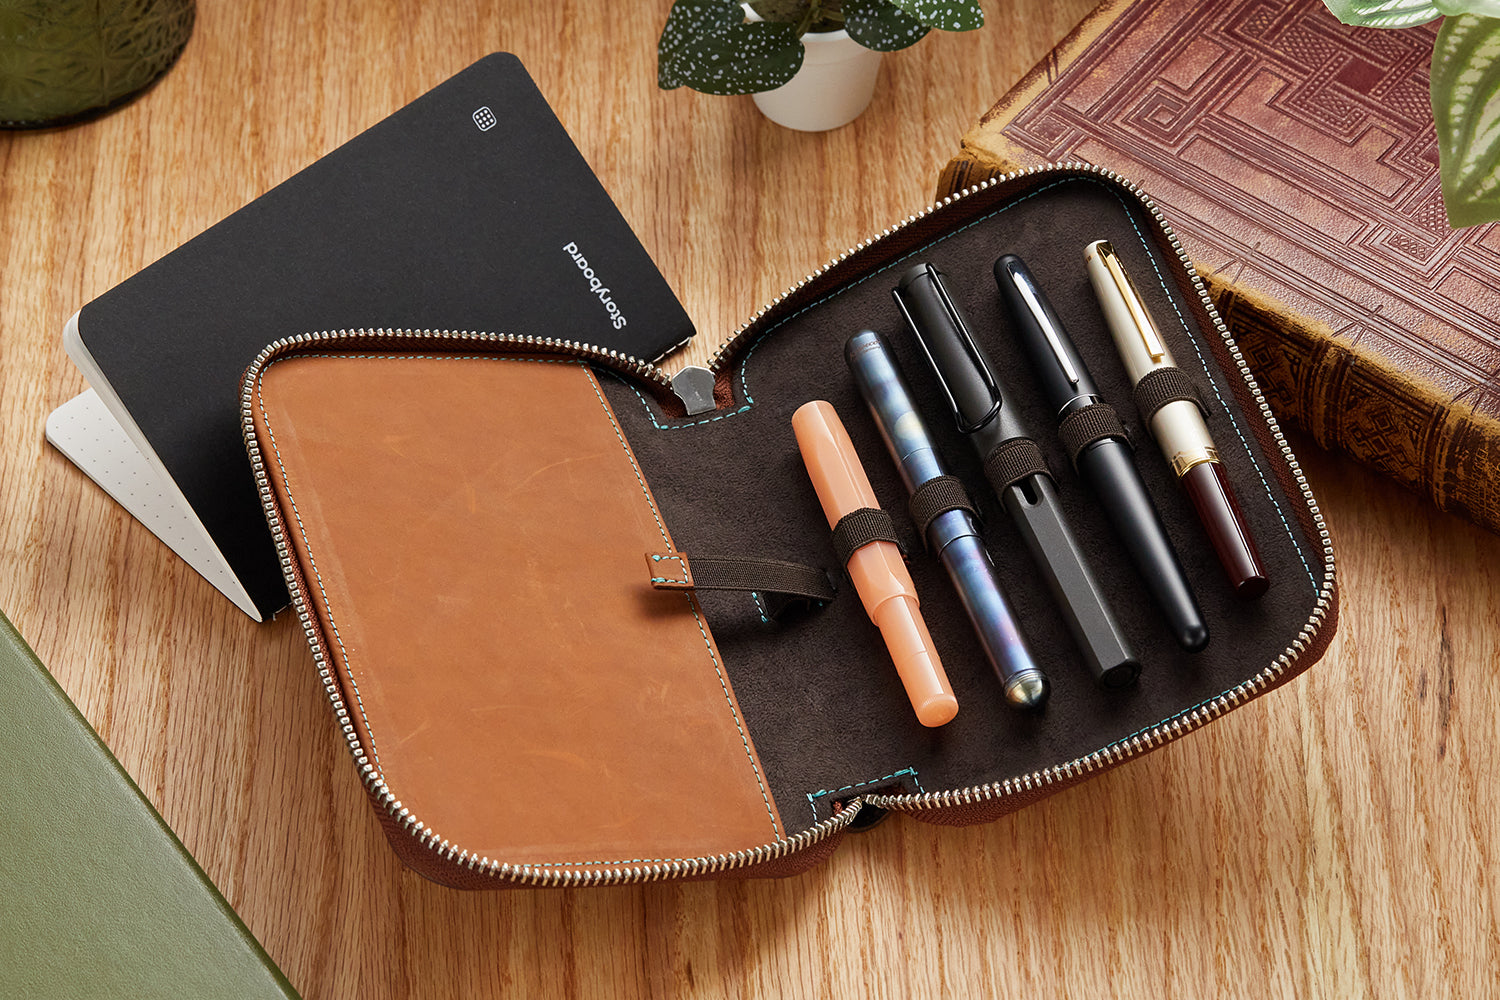 Endless Companion Leather Adjustable Pen Pouch - 3 Pens - Brown – Endless  Stationery